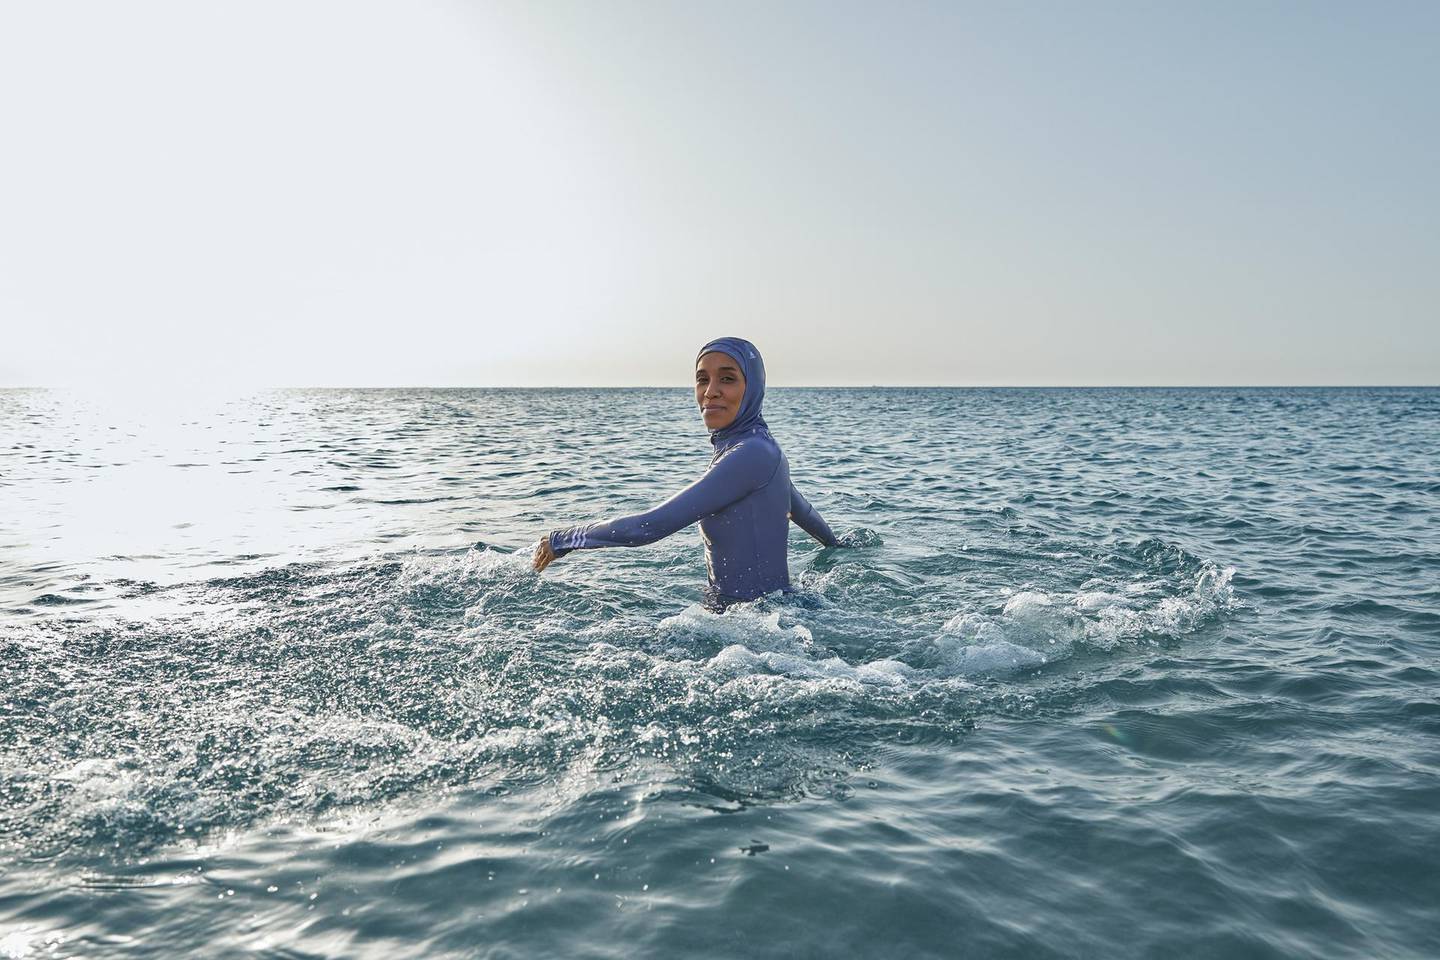 Adidas launches its first full coverage swimwear range, with a campaign starring Sudanese / British athlete and activist Asma Elbadawi. Courtesy Adidas